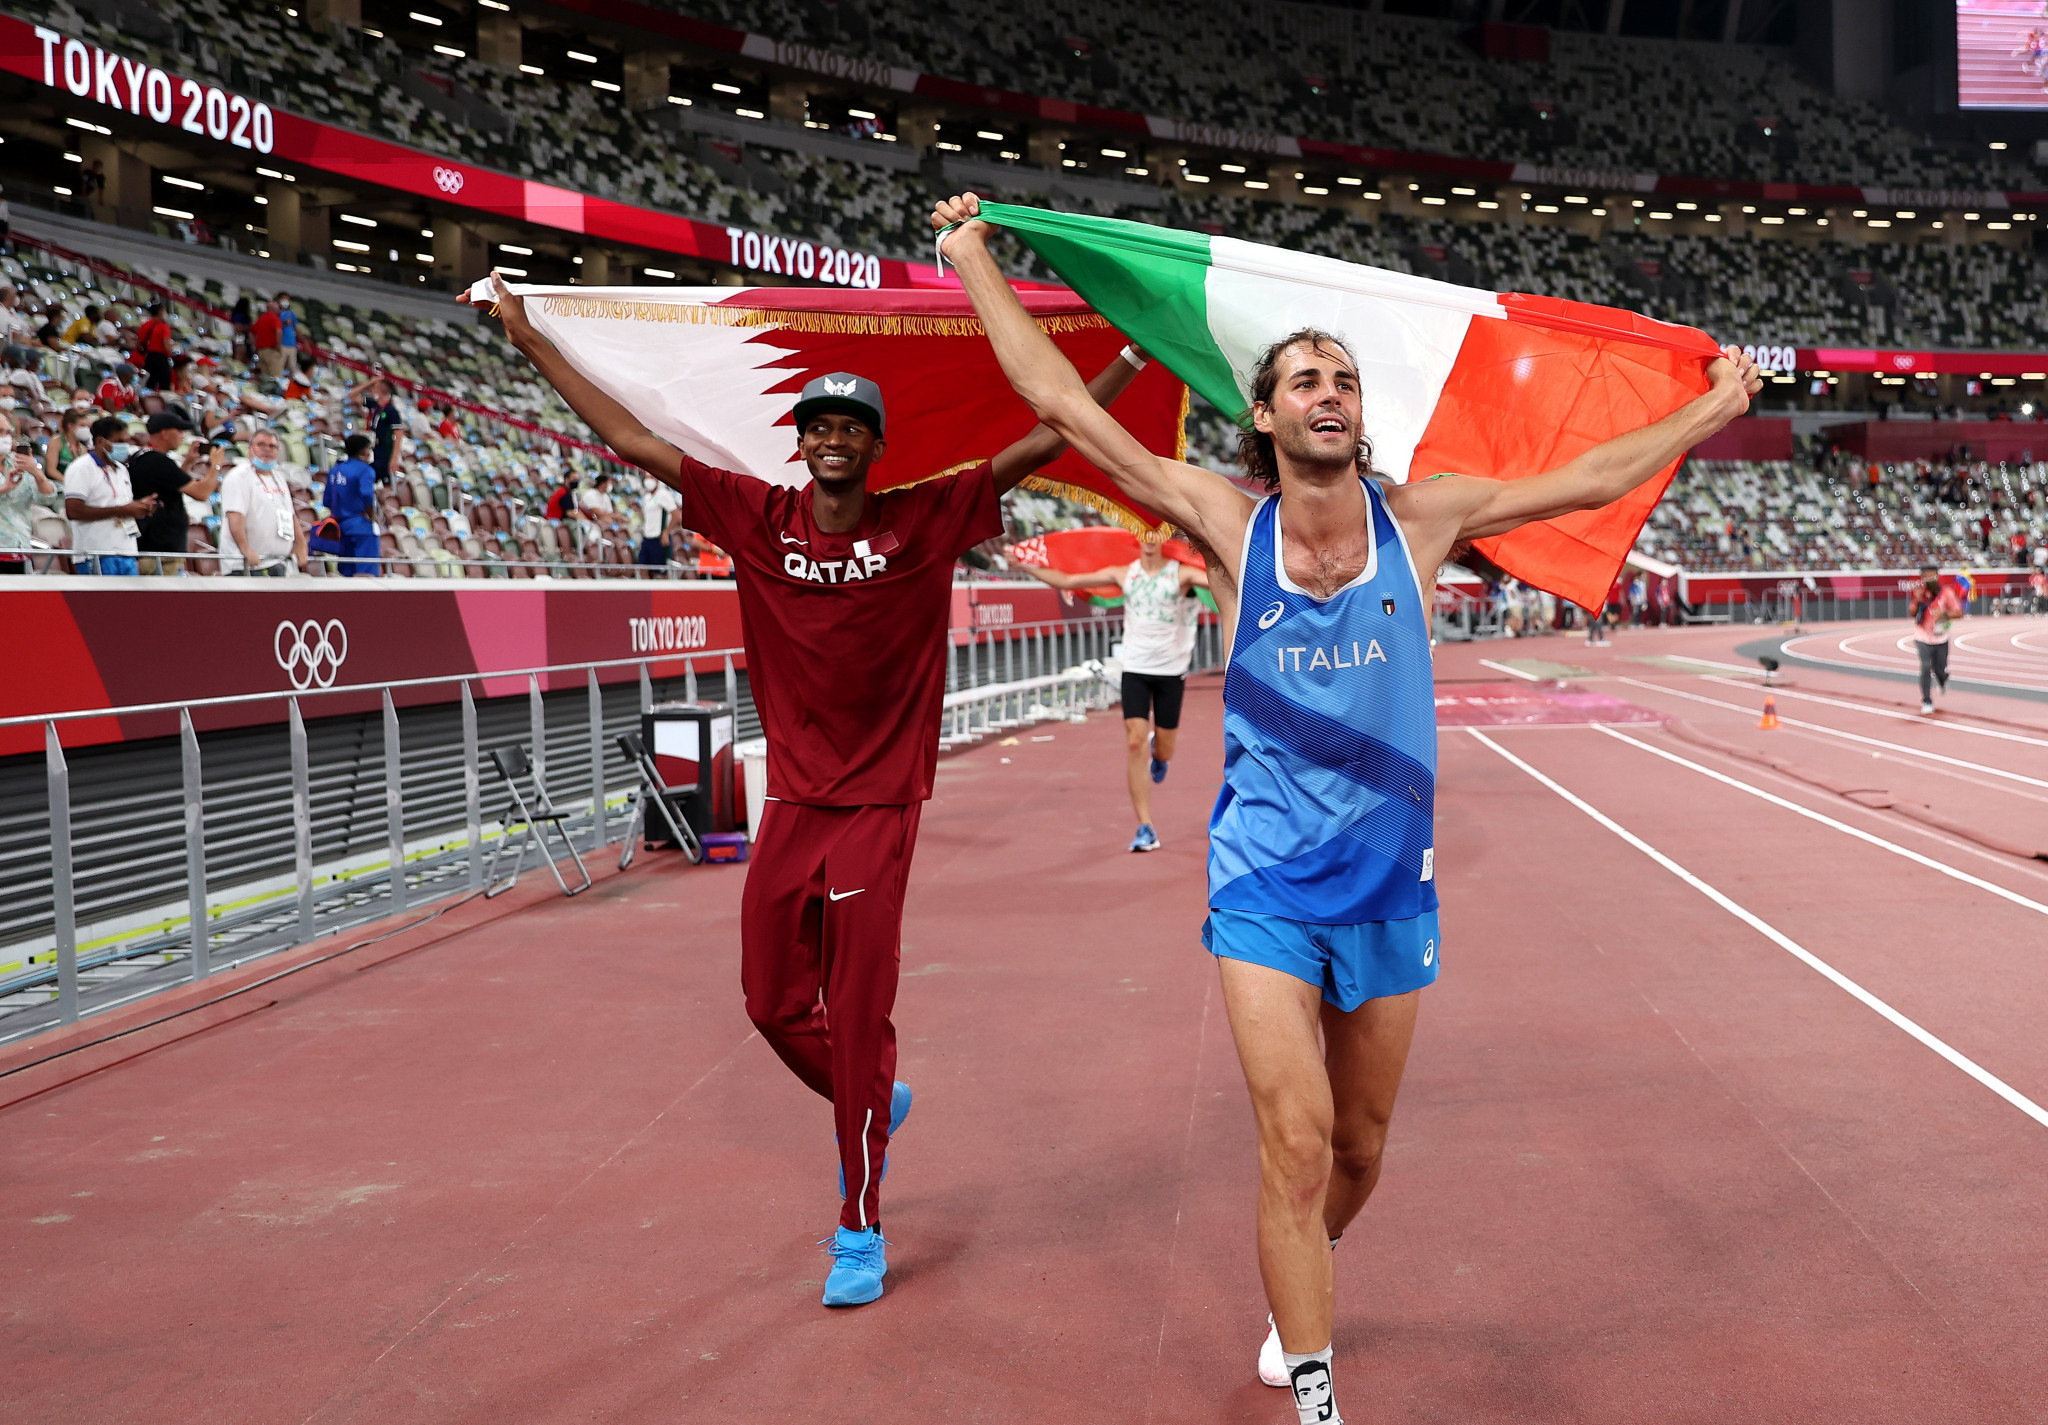 Mutaz Barshim of Qatar, left, and Italy's Gianmarco Tamberi, who shared the Olympic high jump title rather than engaging in a jump-off, received an Inspiration Award at the World Athletics Awards ©Getty Images